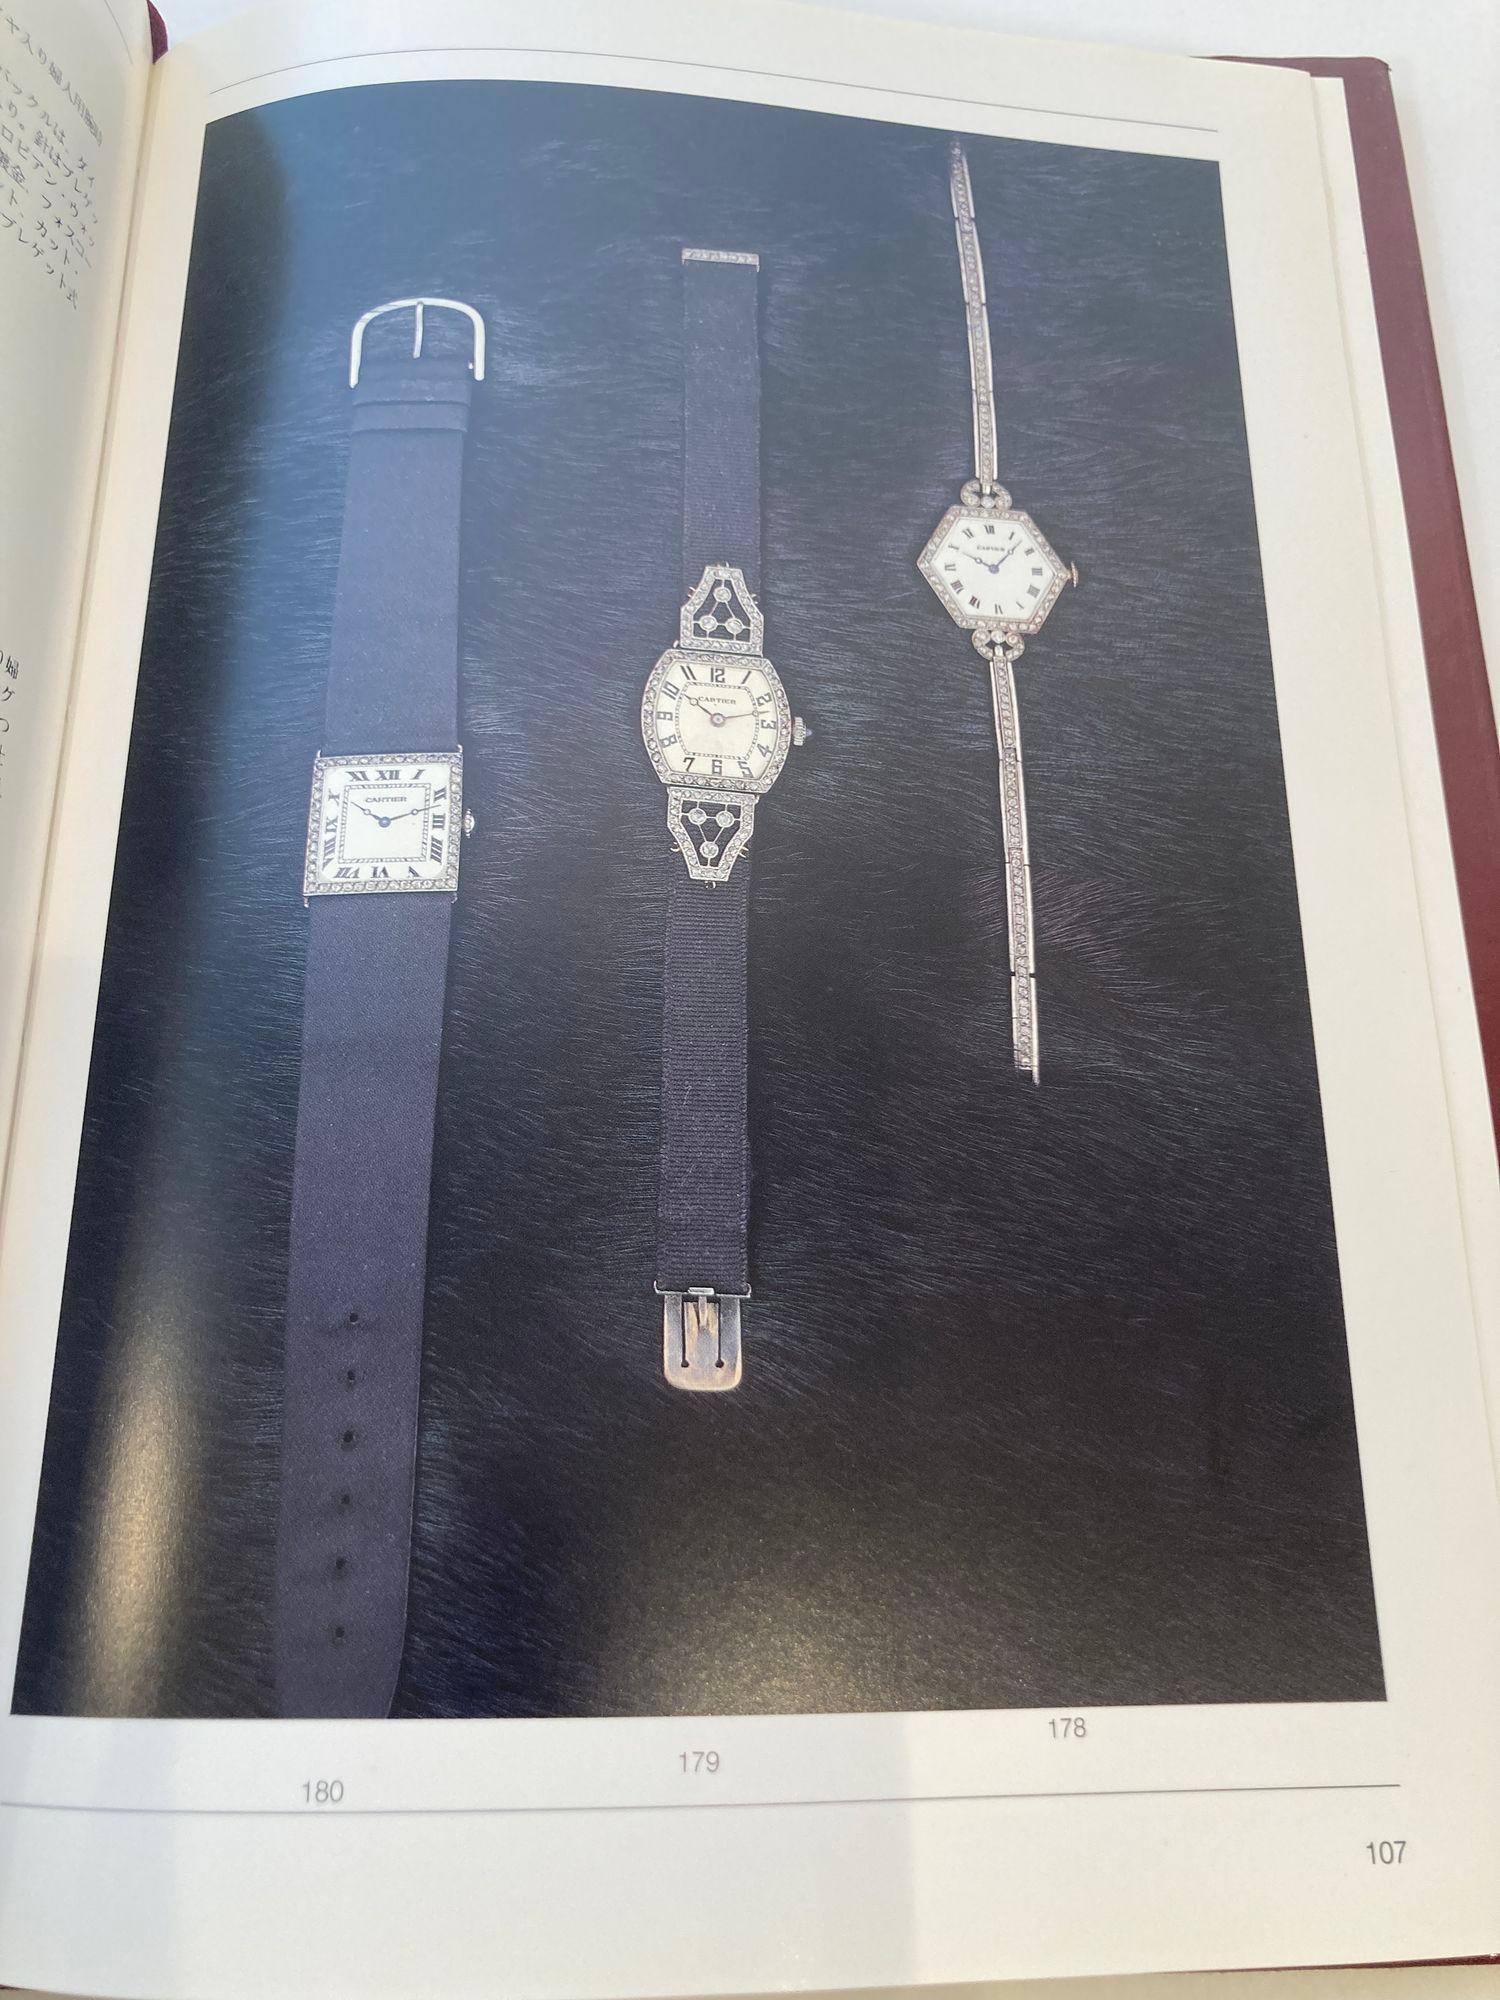 The Art of Cartier 1988 Genf Auktions-Hardcoverbuch im Angebot 9